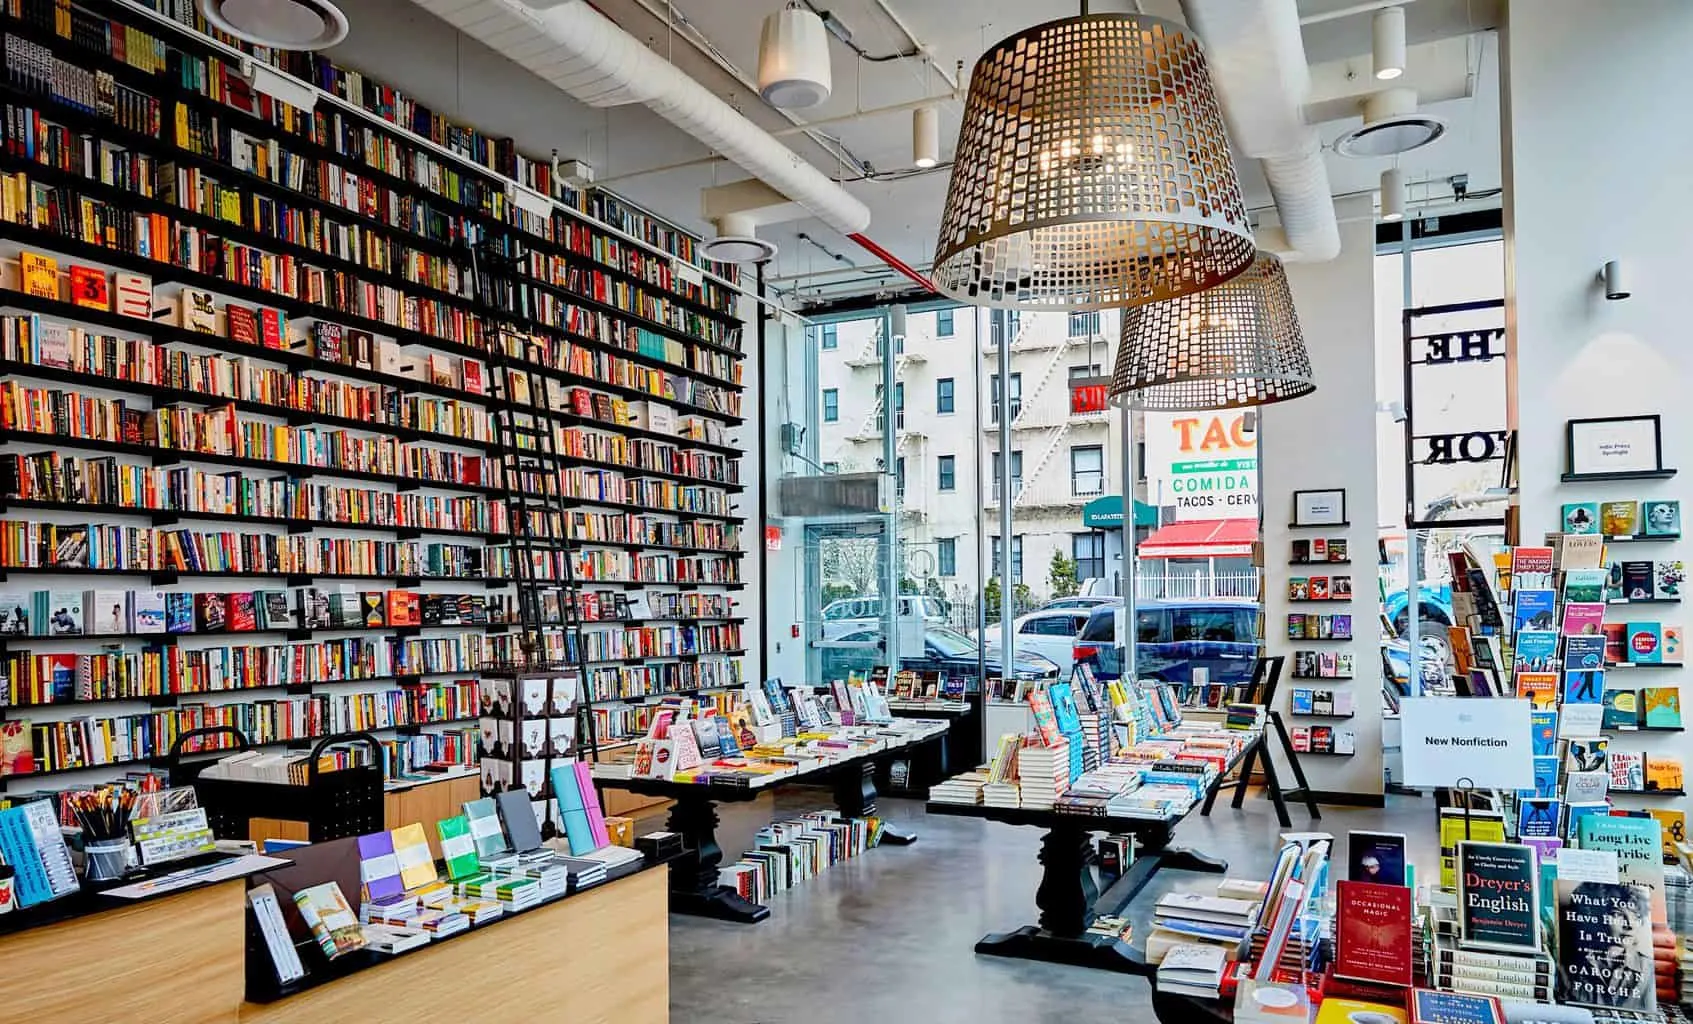 The light, bright, and welcoming interior of the Center for Fiction in Brooklyn.